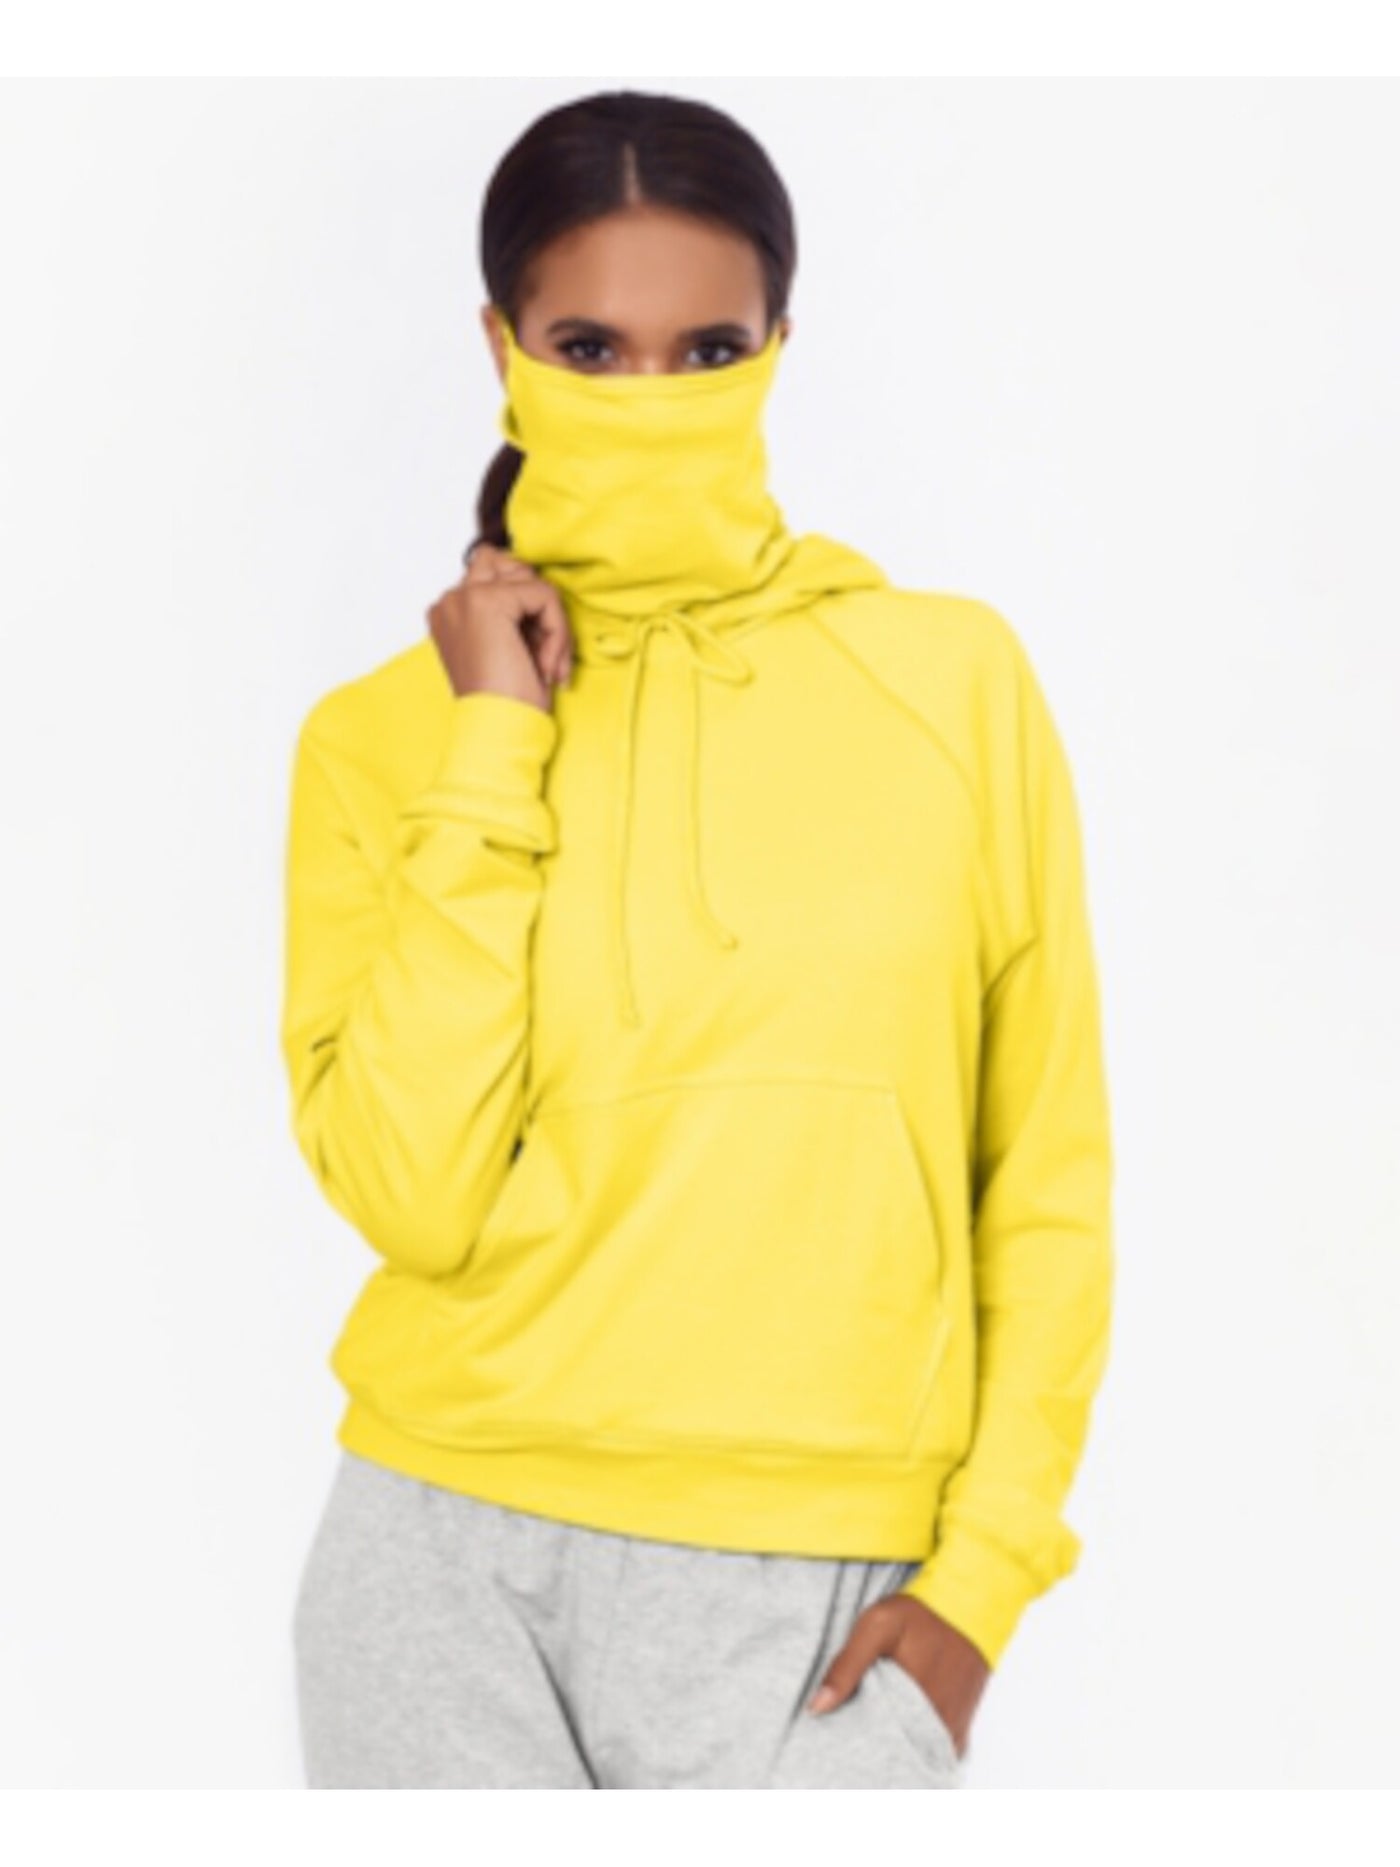 BAM BY BETSY & ADAM Womens Yellow Built-in Mask, Hits At Hip, Rela Long Sleeve Crew Neck Sweater L